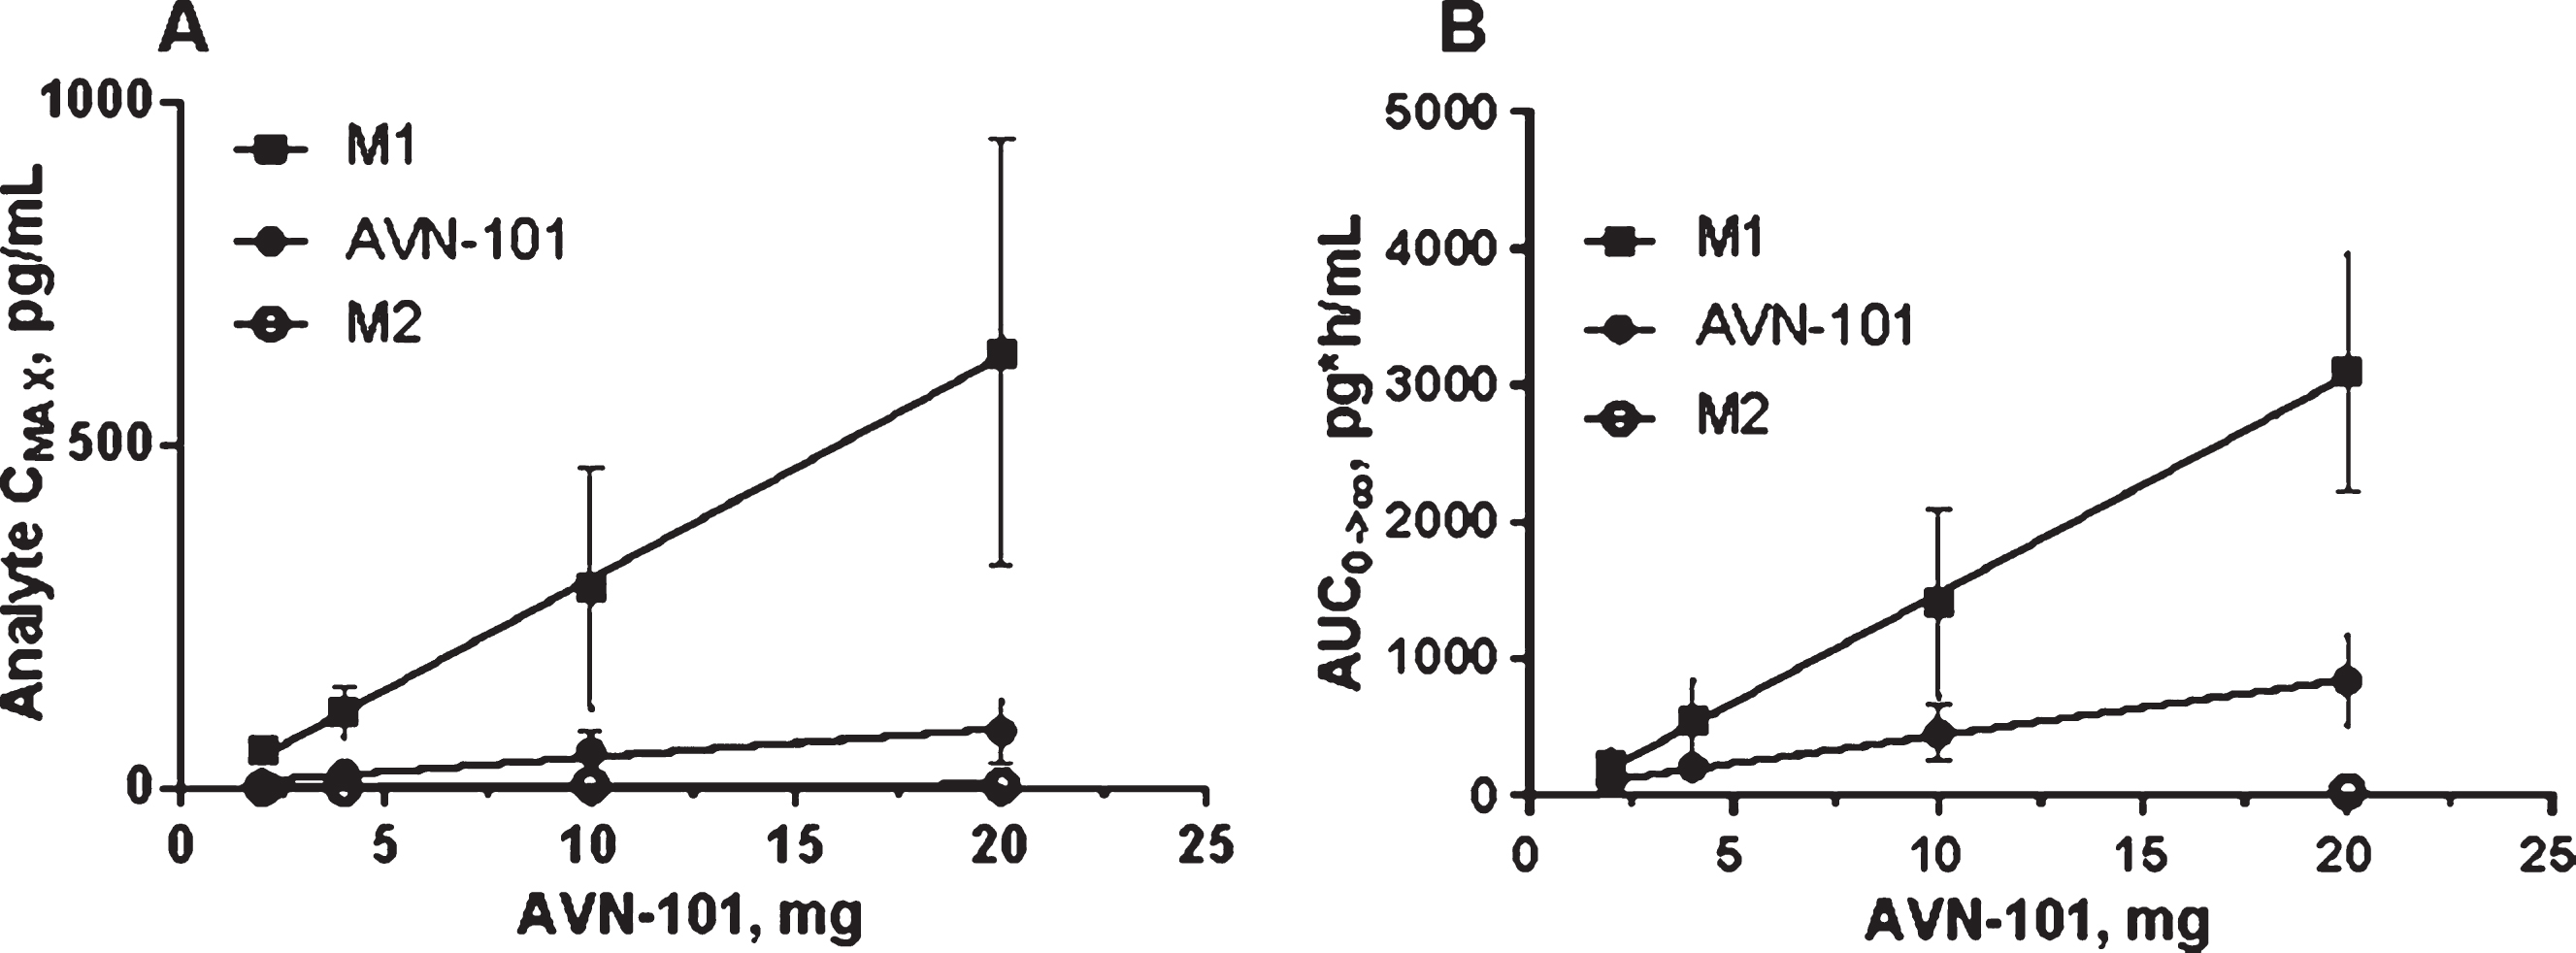 Relation between an AVN-101 dose upon PO administration and blood concentration of AVN-101 and its two metabolites, M1 and M2, in humans. A) Peak concentration, Cmax (mean ± SD). B) Exposure, AUC (mean ± SD).